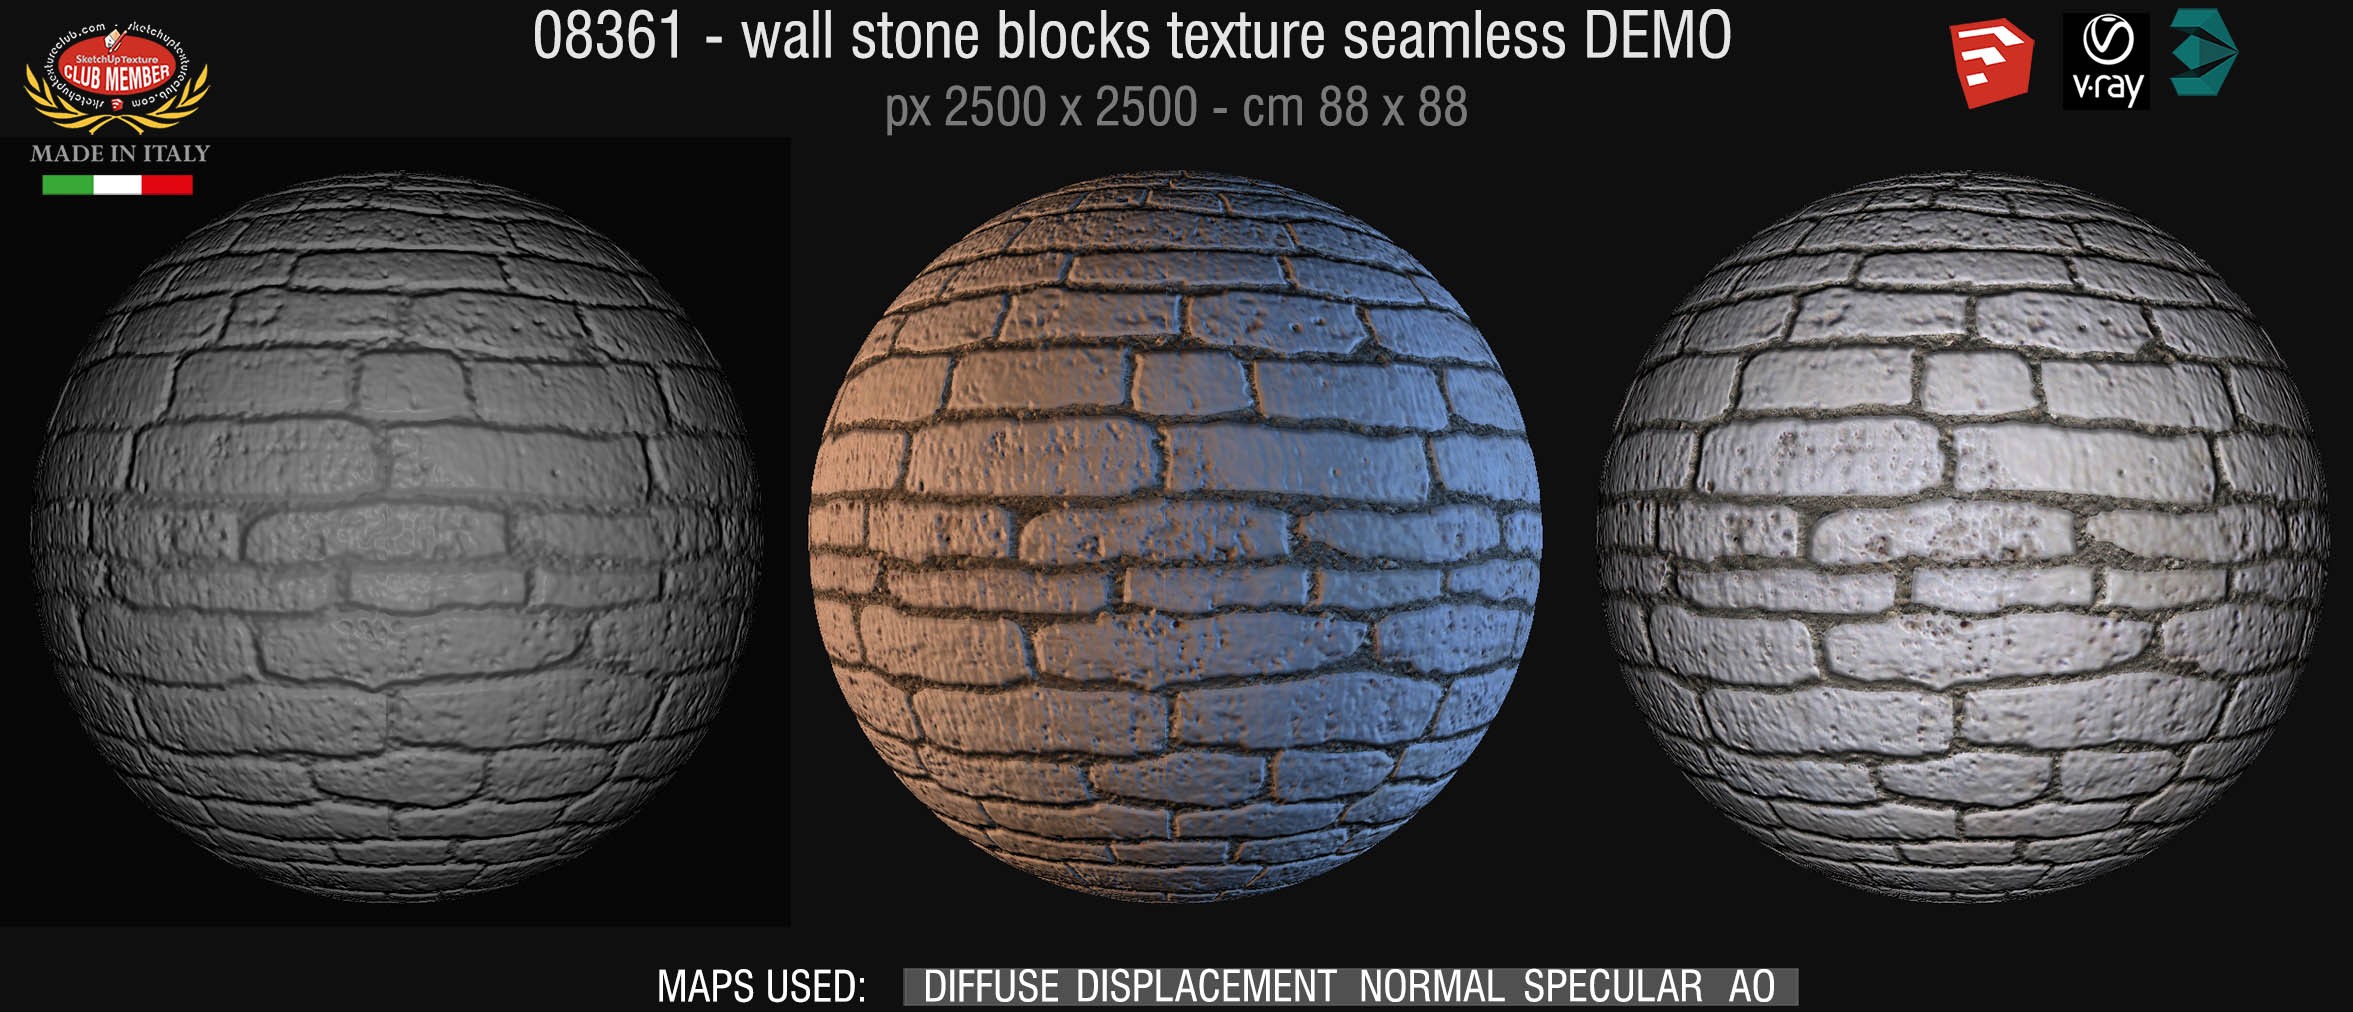 08361 HR Wall stone with regular blocks texture + maps DEMO